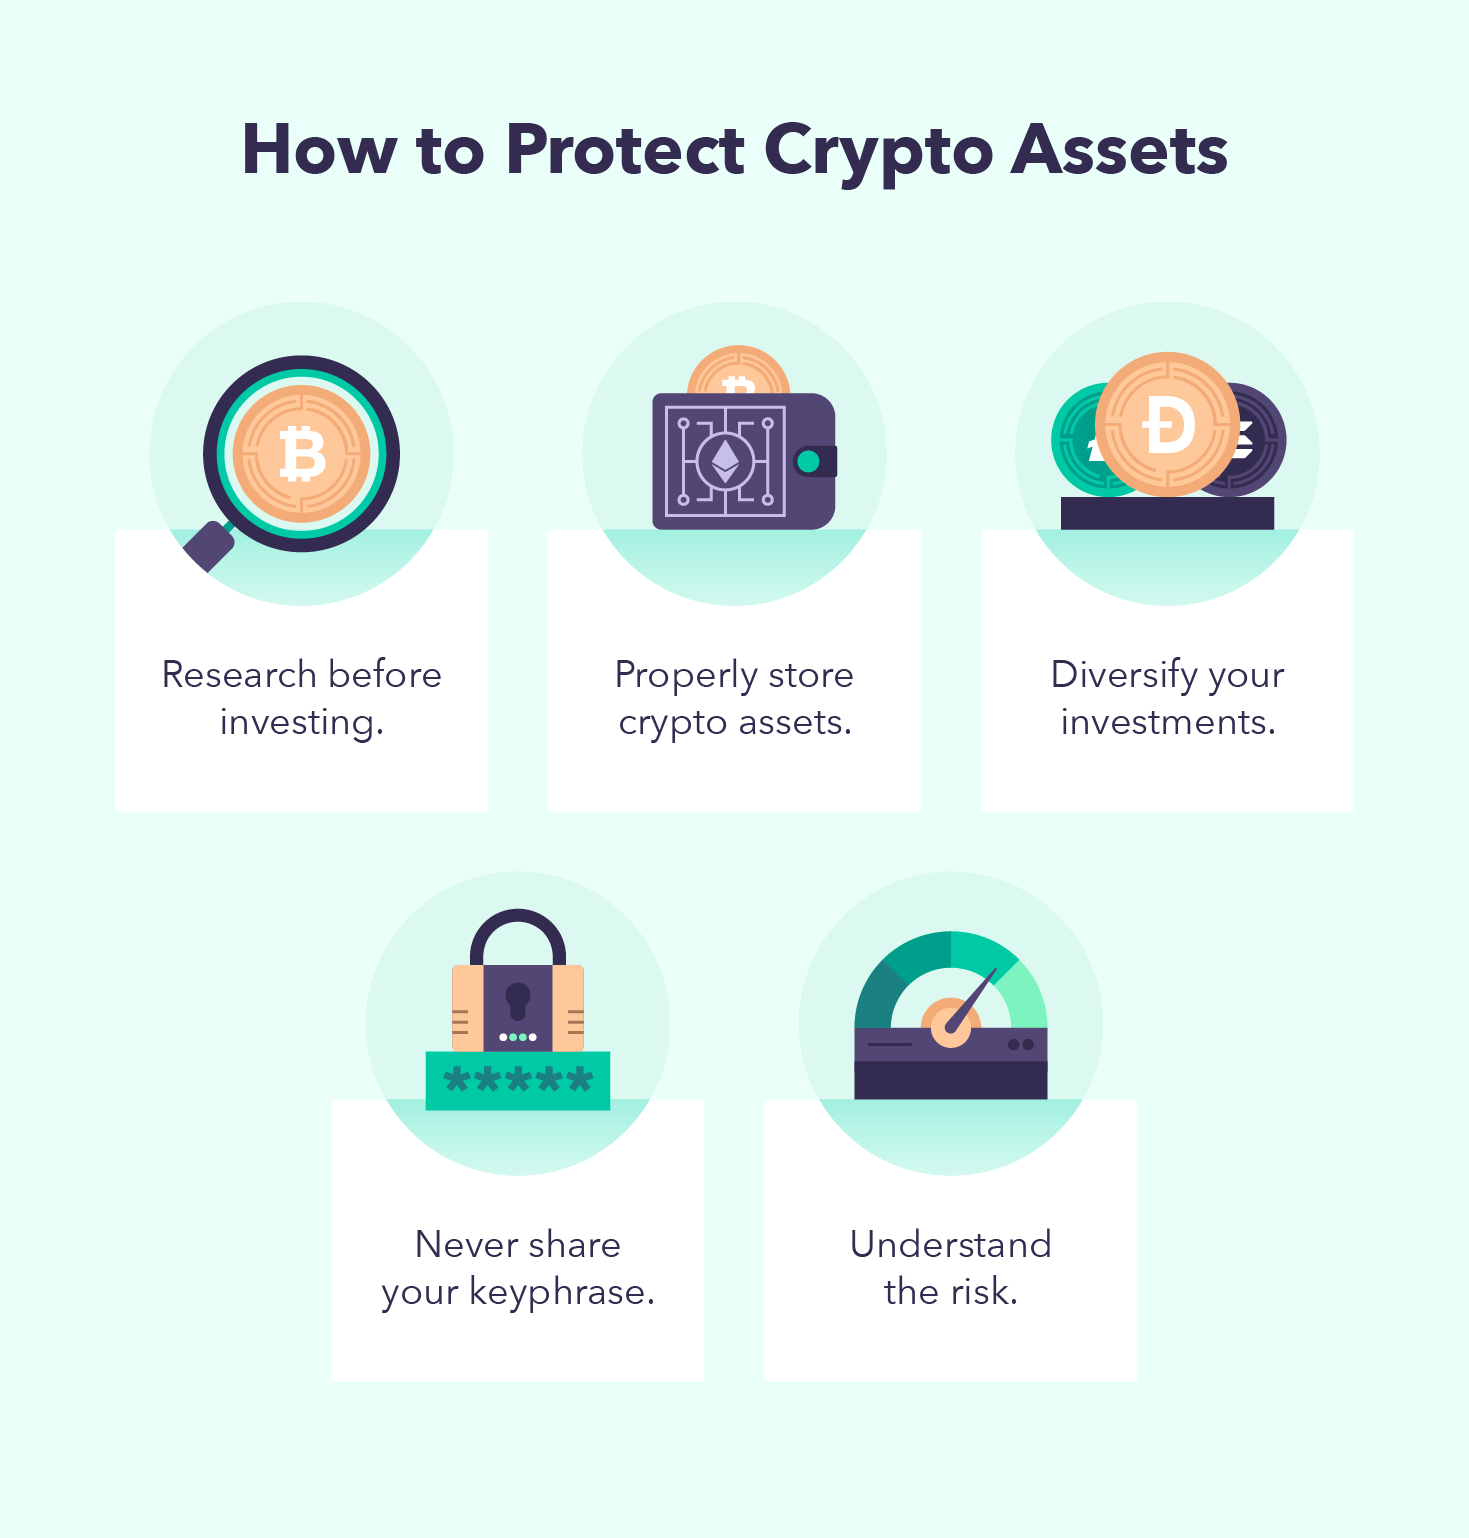 A graphic lists tips to help keep your crypto assets safe.